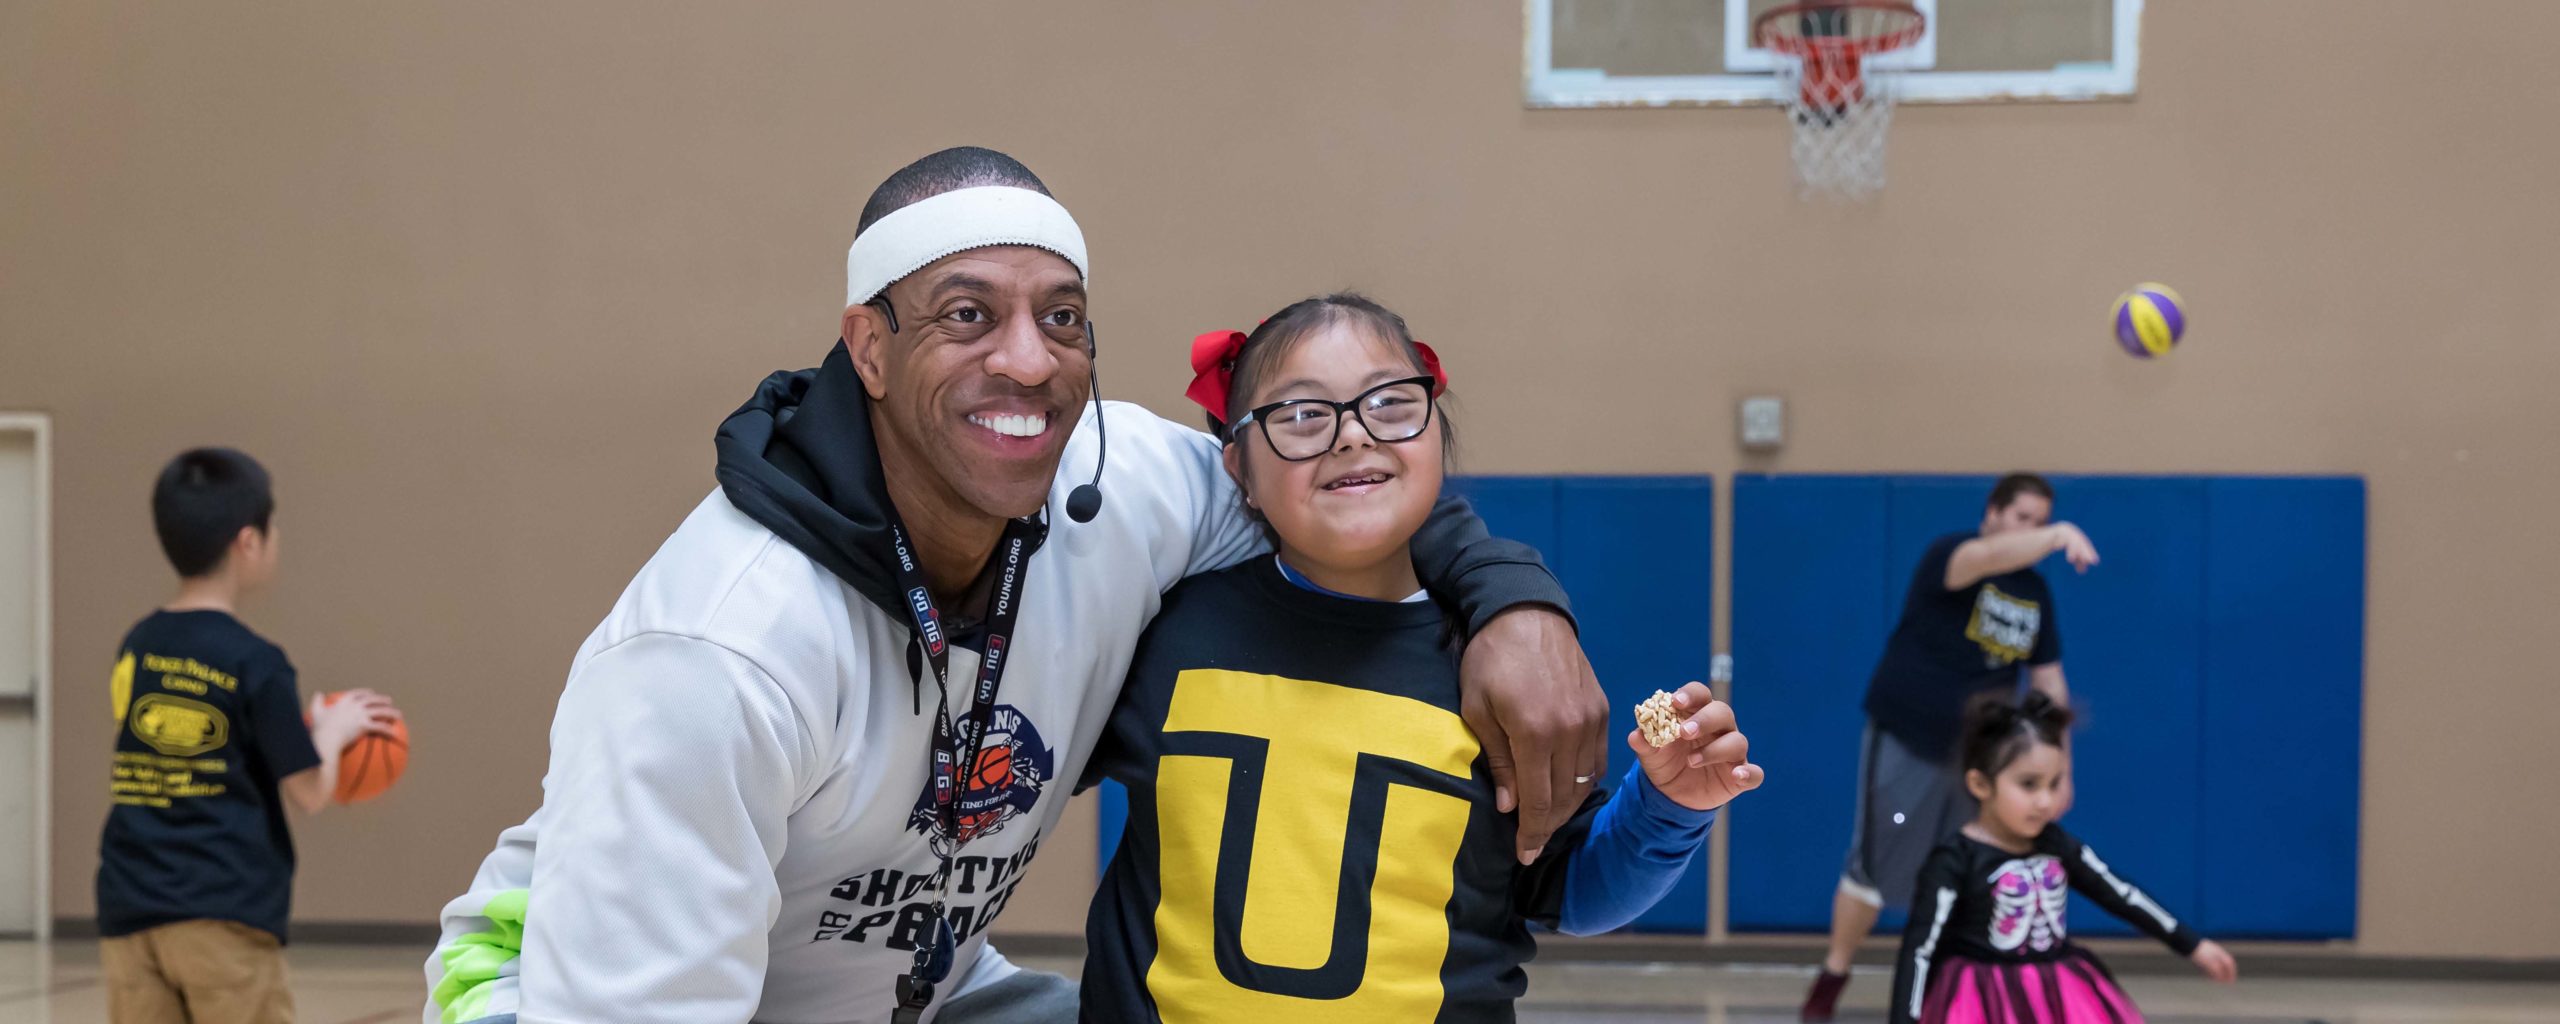 Touro Holds 2020 Basketball Clinic for Children with Autism and Developmental Disabilities